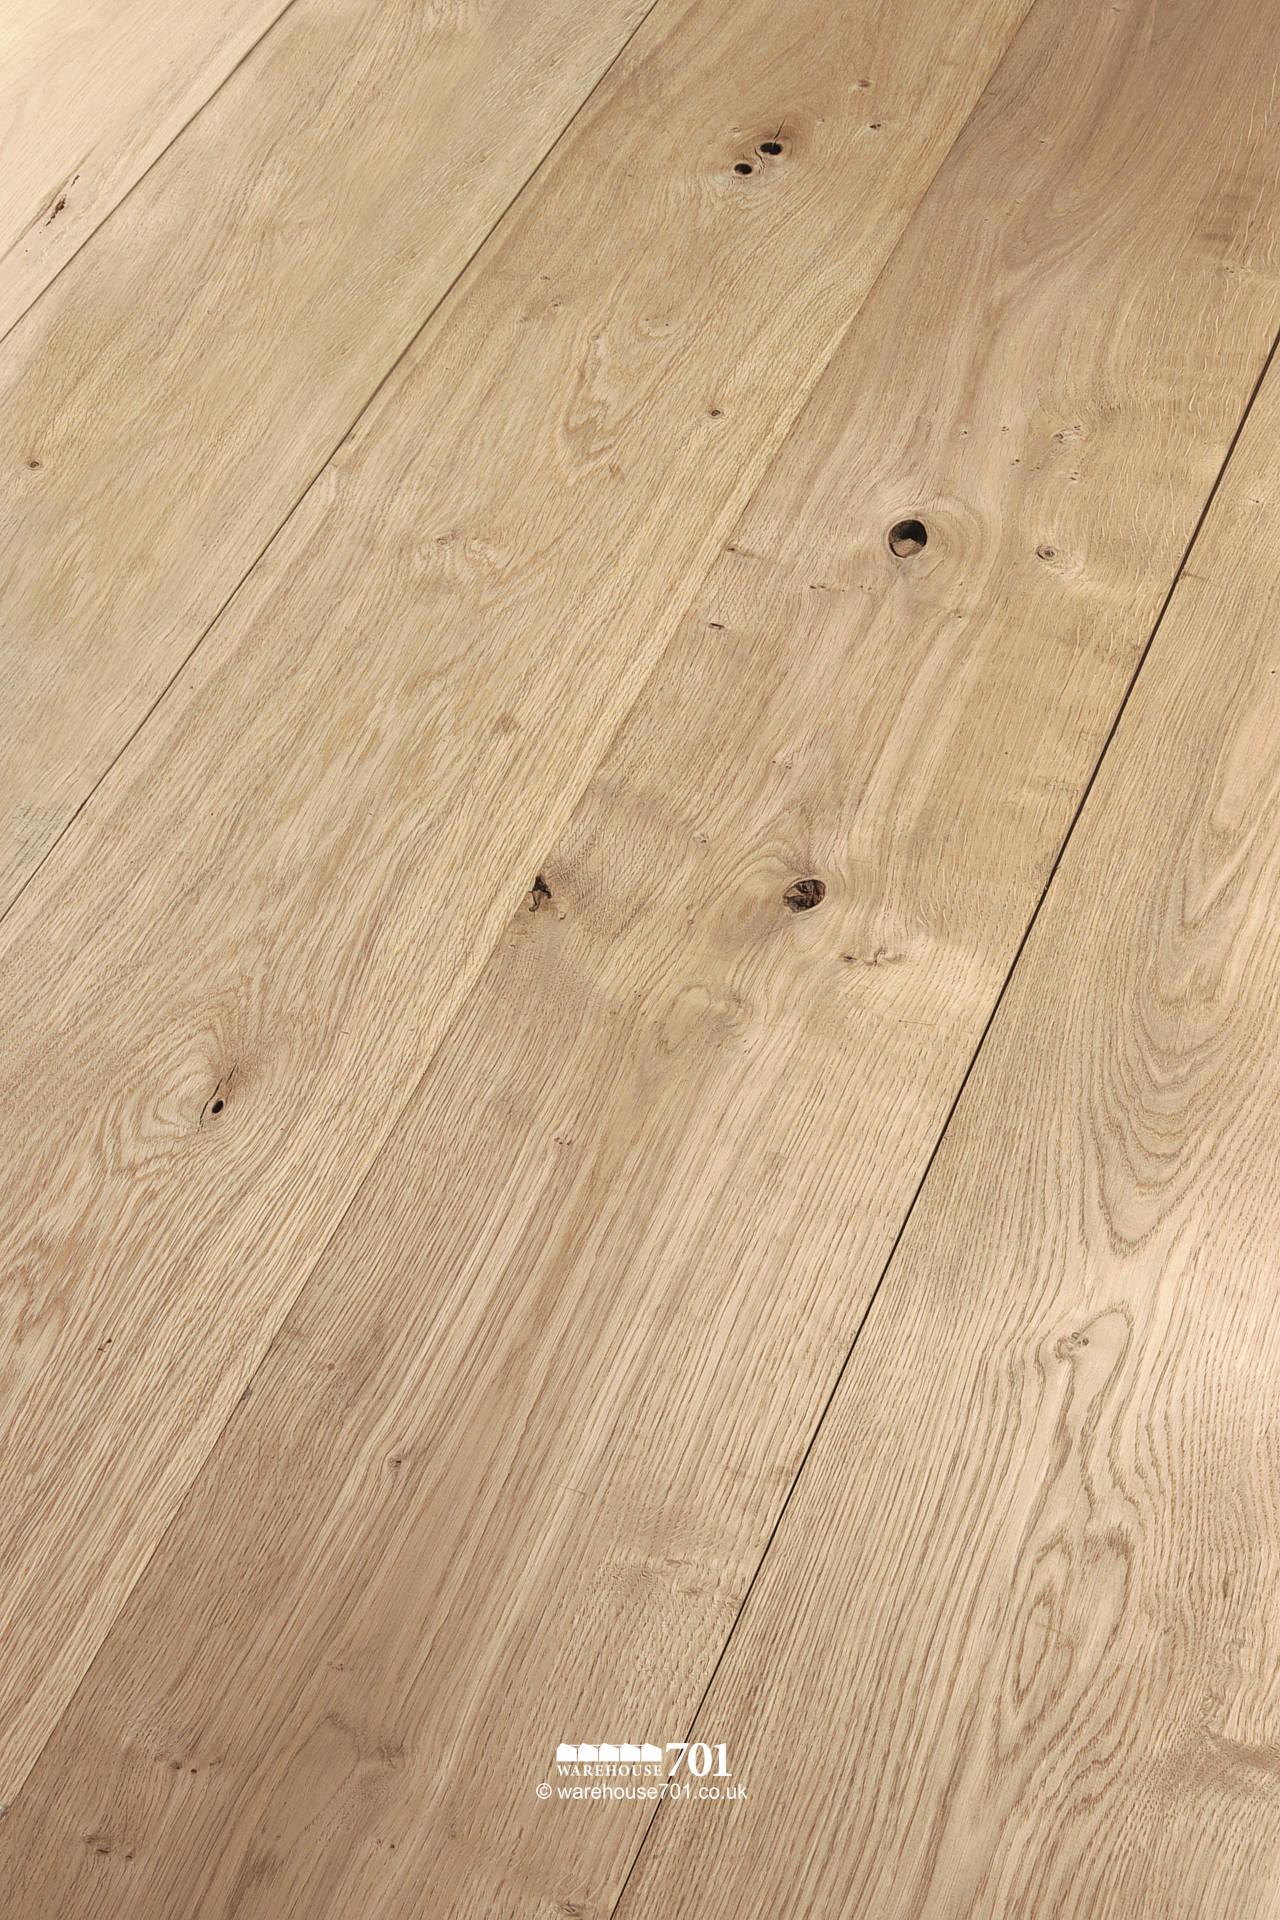 New Natural Oak Solid Wood Tongue and Groove Plank Flooring #3